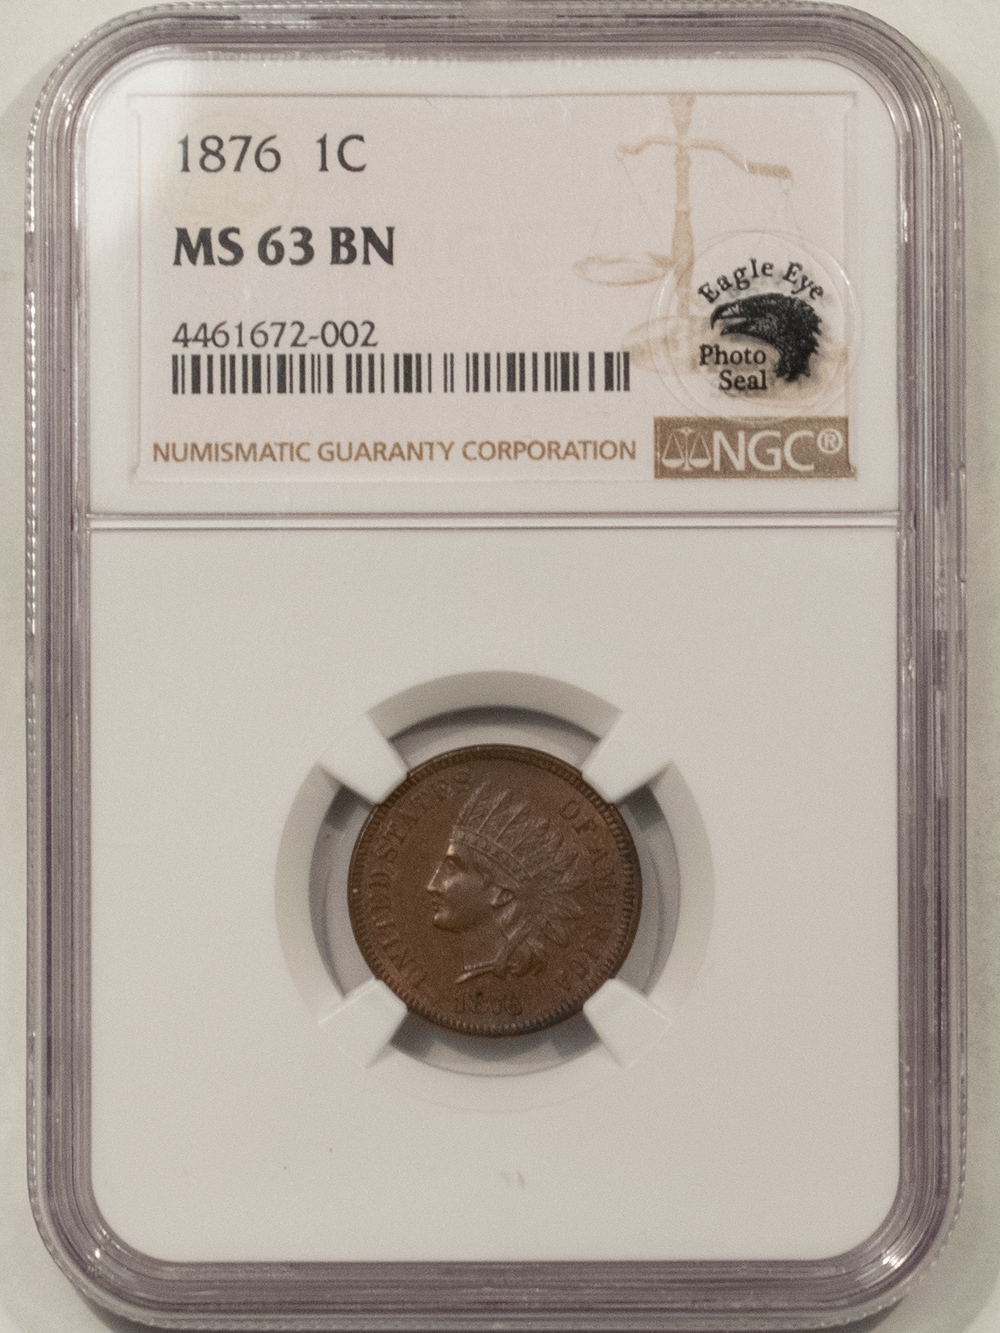 1876 INDIAN CENT - NGC MS-63 BN, EAGLE EYE PHOTO SEAL, SMOOTH & PQ!